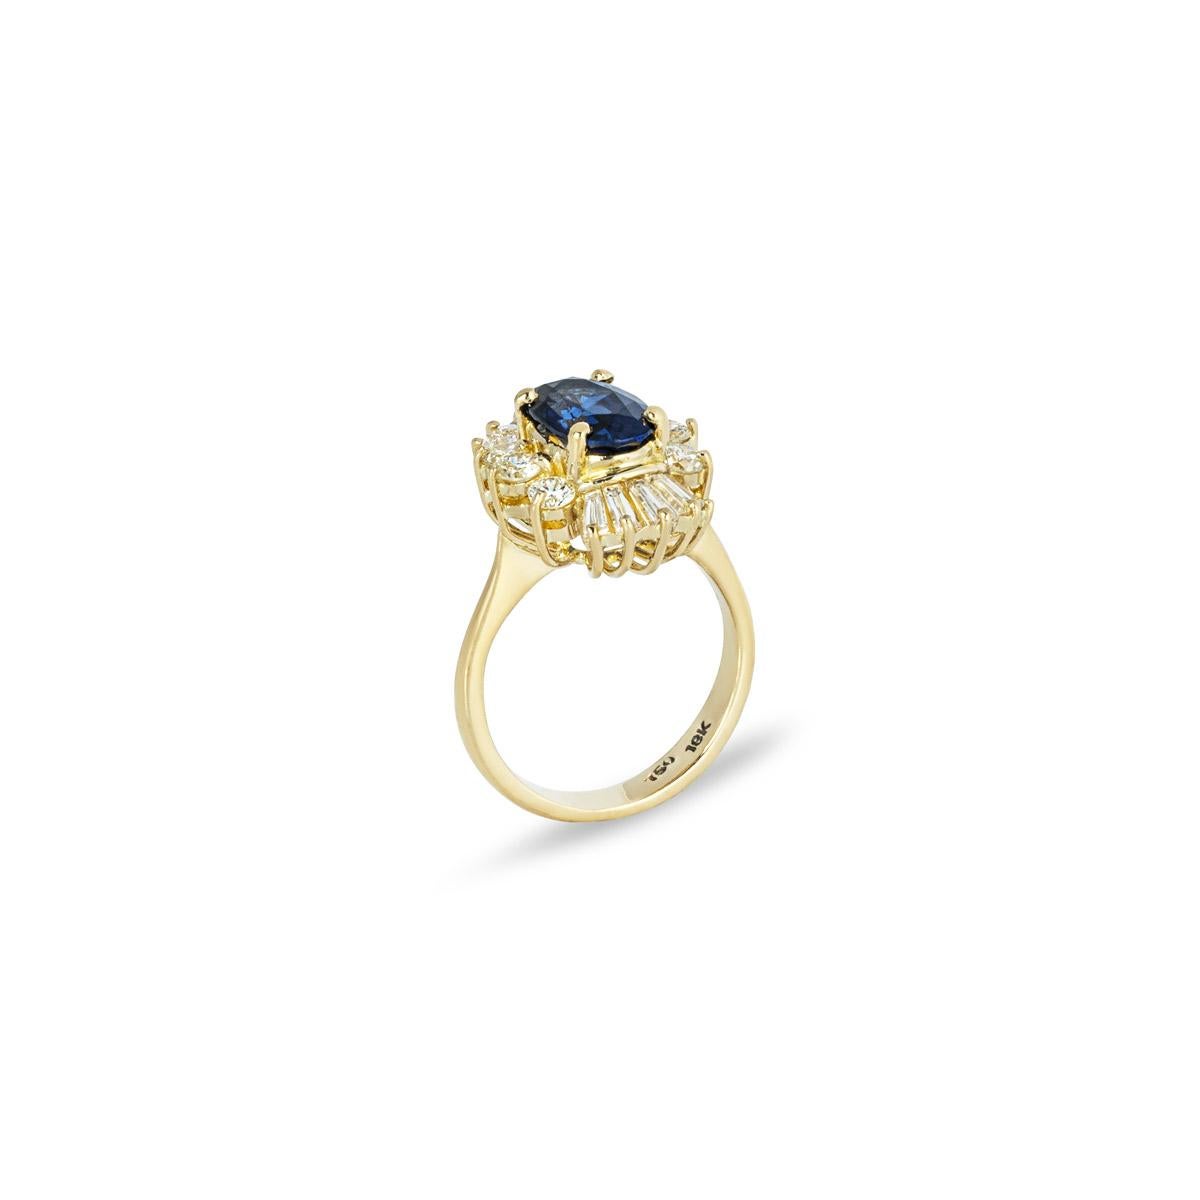 A beautiful 18k yellow gold sapphire and diamond dress ring. Set to the centre in a four prong mount is an oval cut sapphire weighing approximately 1.27ct and displaying a dark blue hue. Accentuating the sapphire are 6 round brilliant cut diamonds